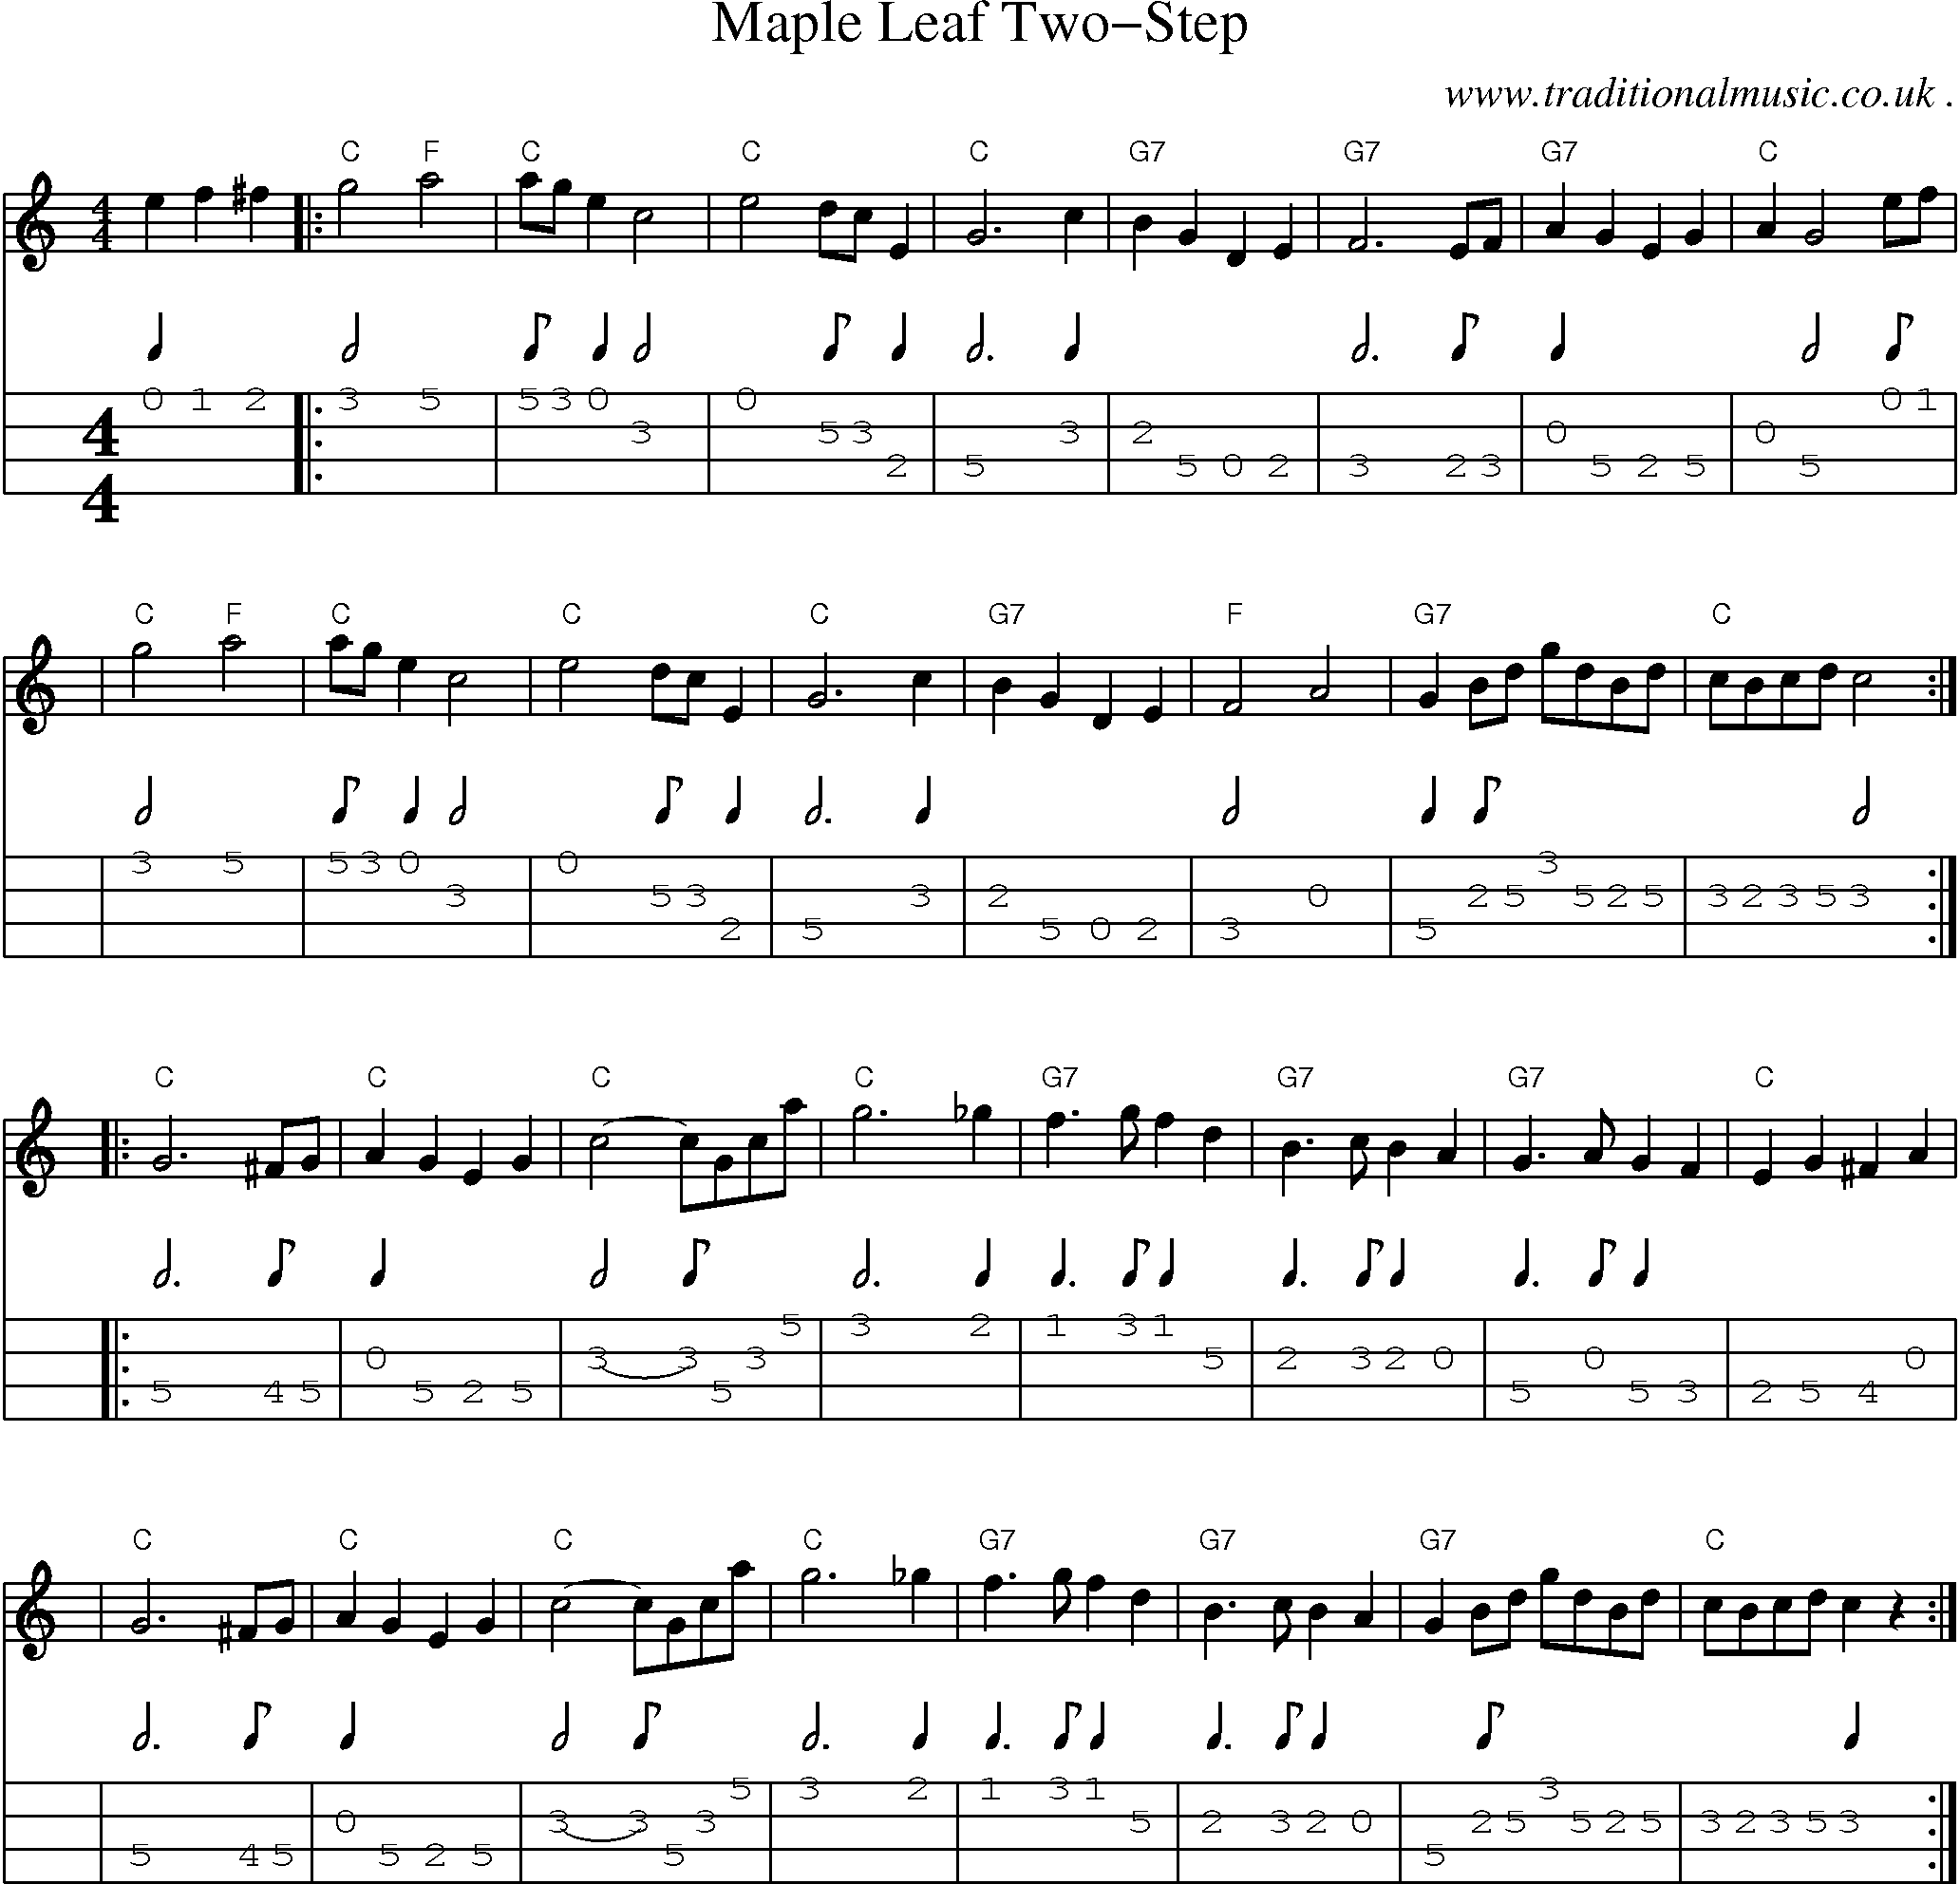 Sheet-music  score, Chords and Mandolin Tabs for Maple Leaf Two-step